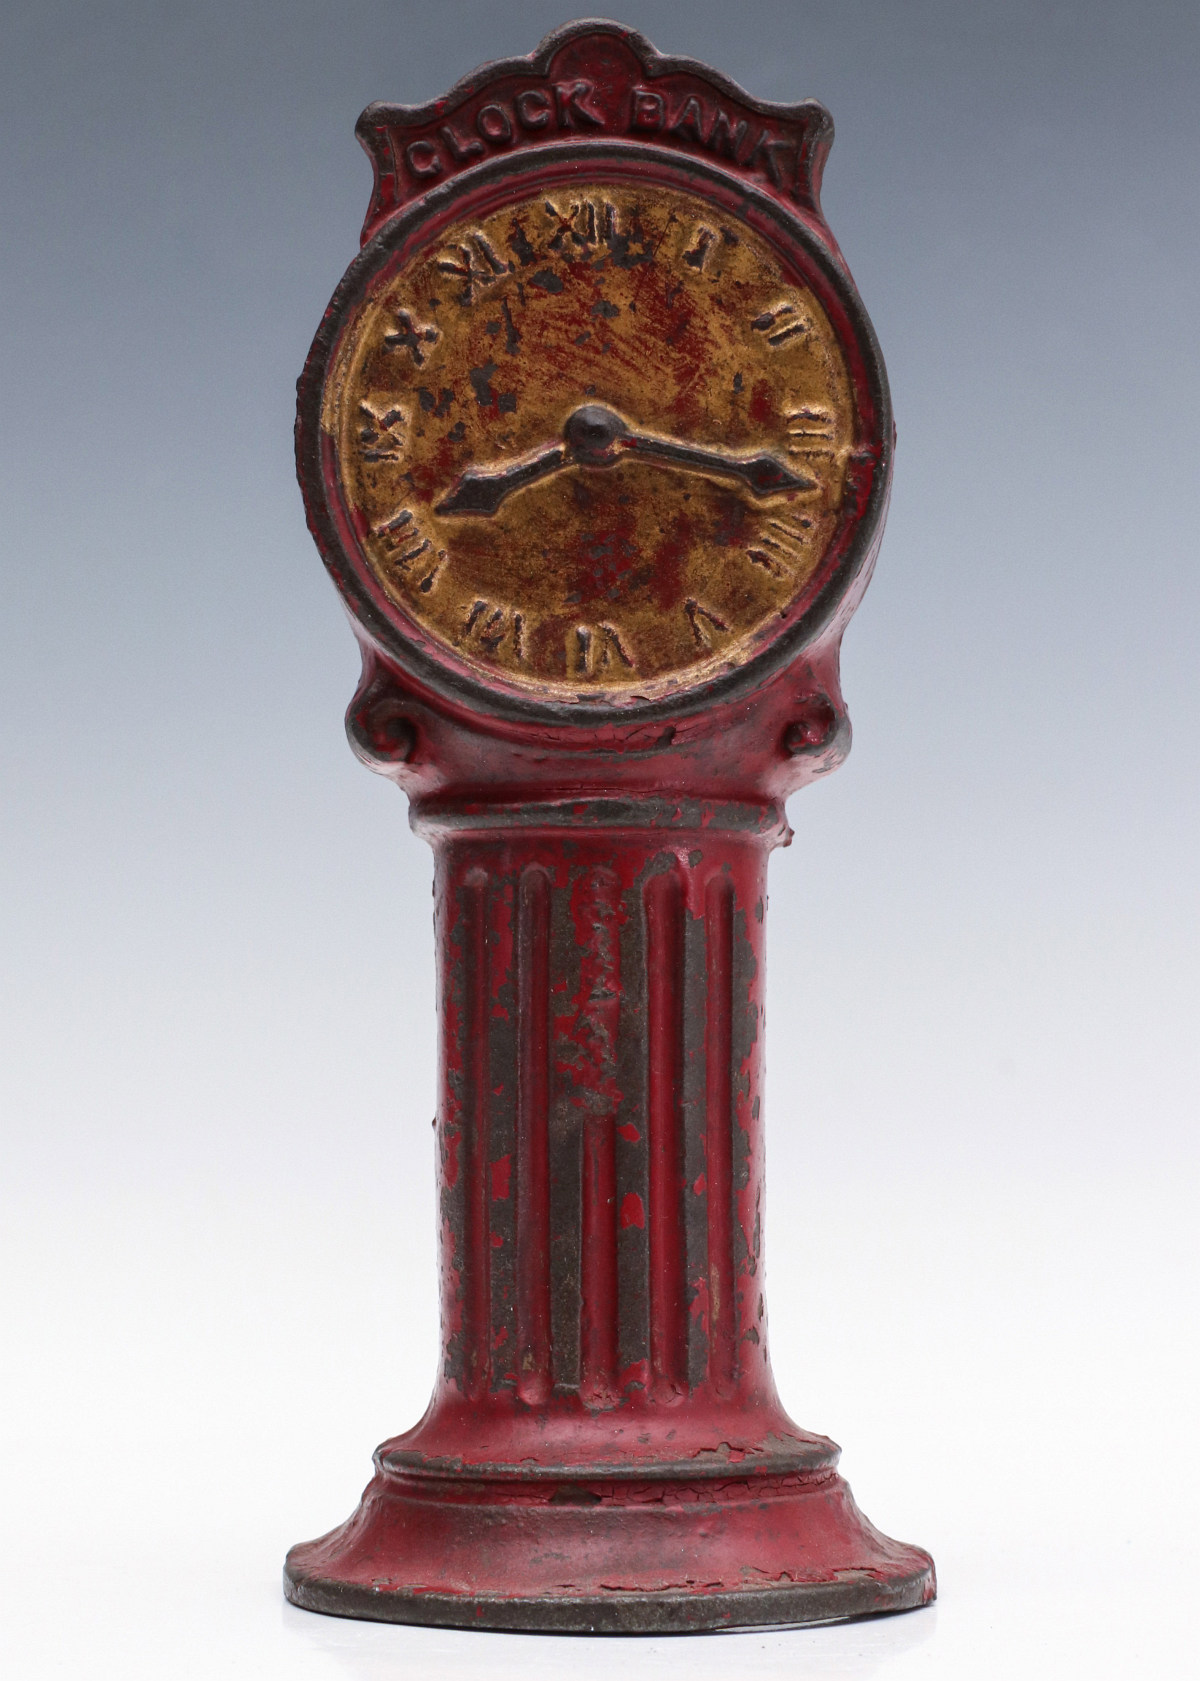 A SCARCE CAST IRON CLOCK BANK ATTRIBUTED TO DENT